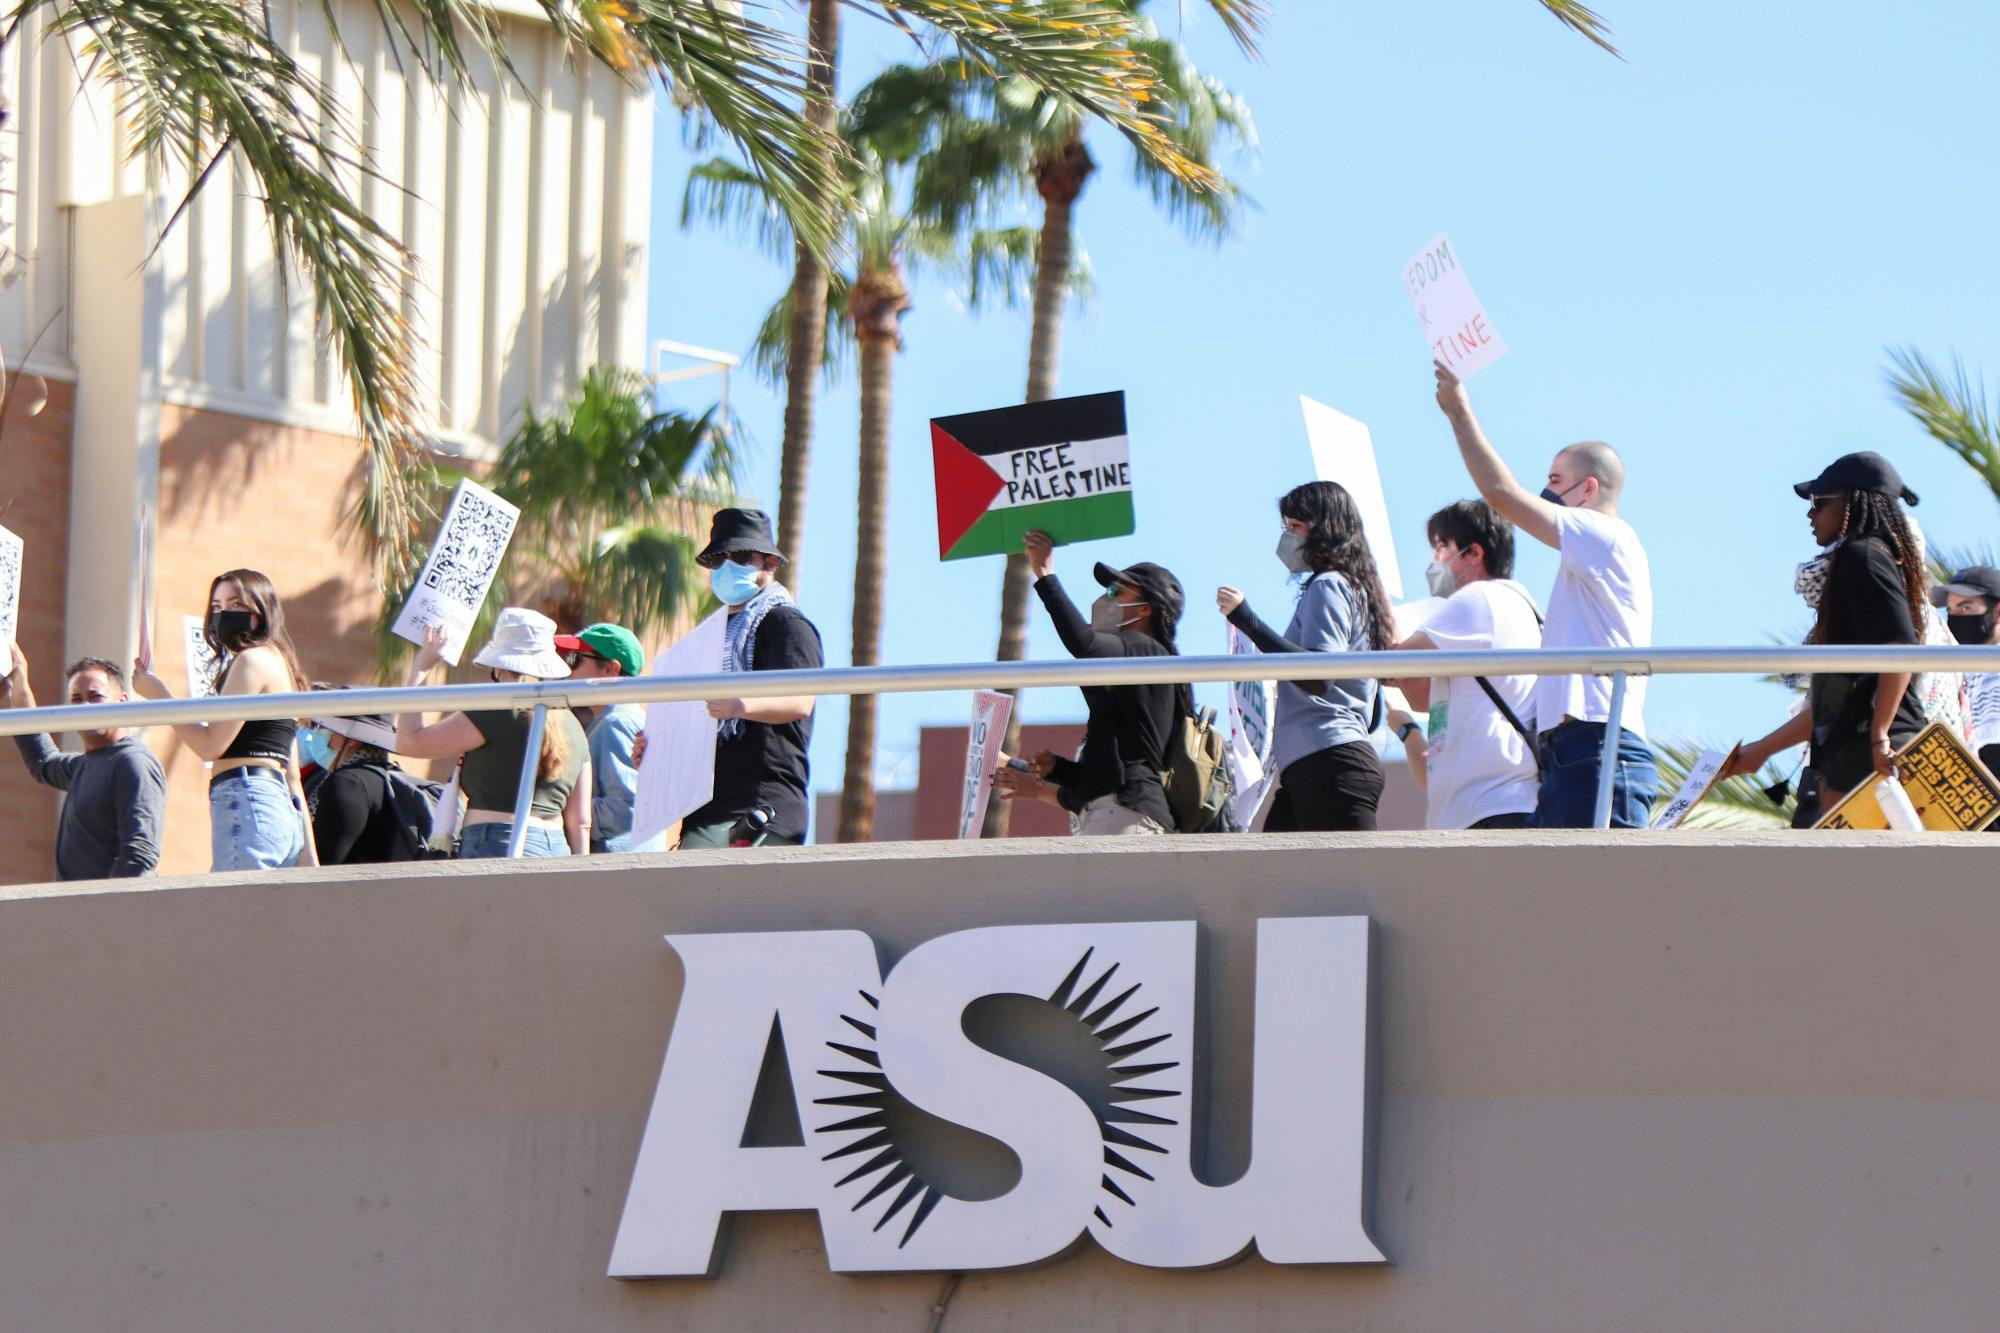 Student organizations call on ASU to boycott and divest from